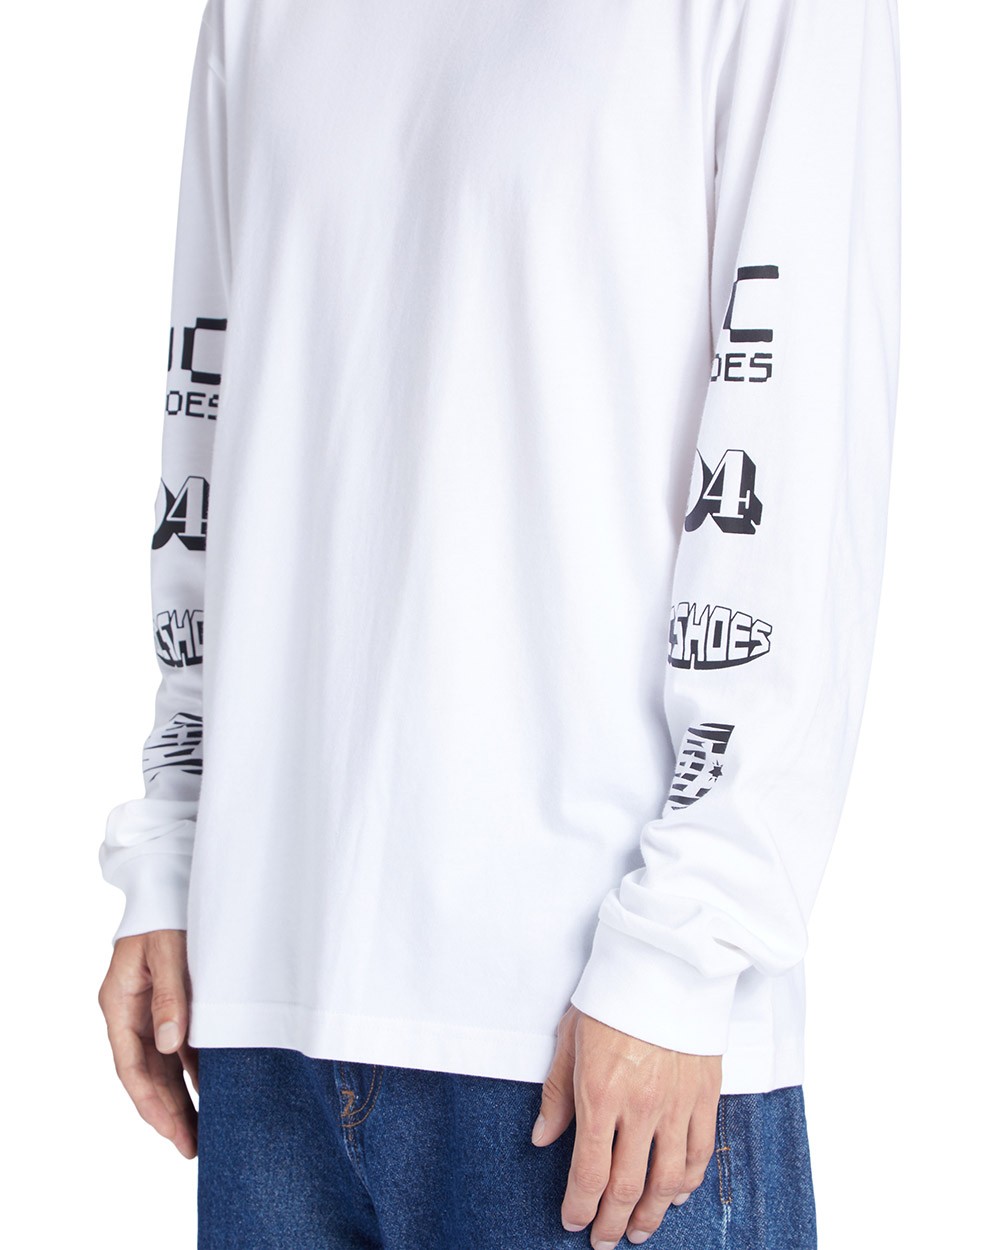 Smiles DC SHOES - T-Shirt All